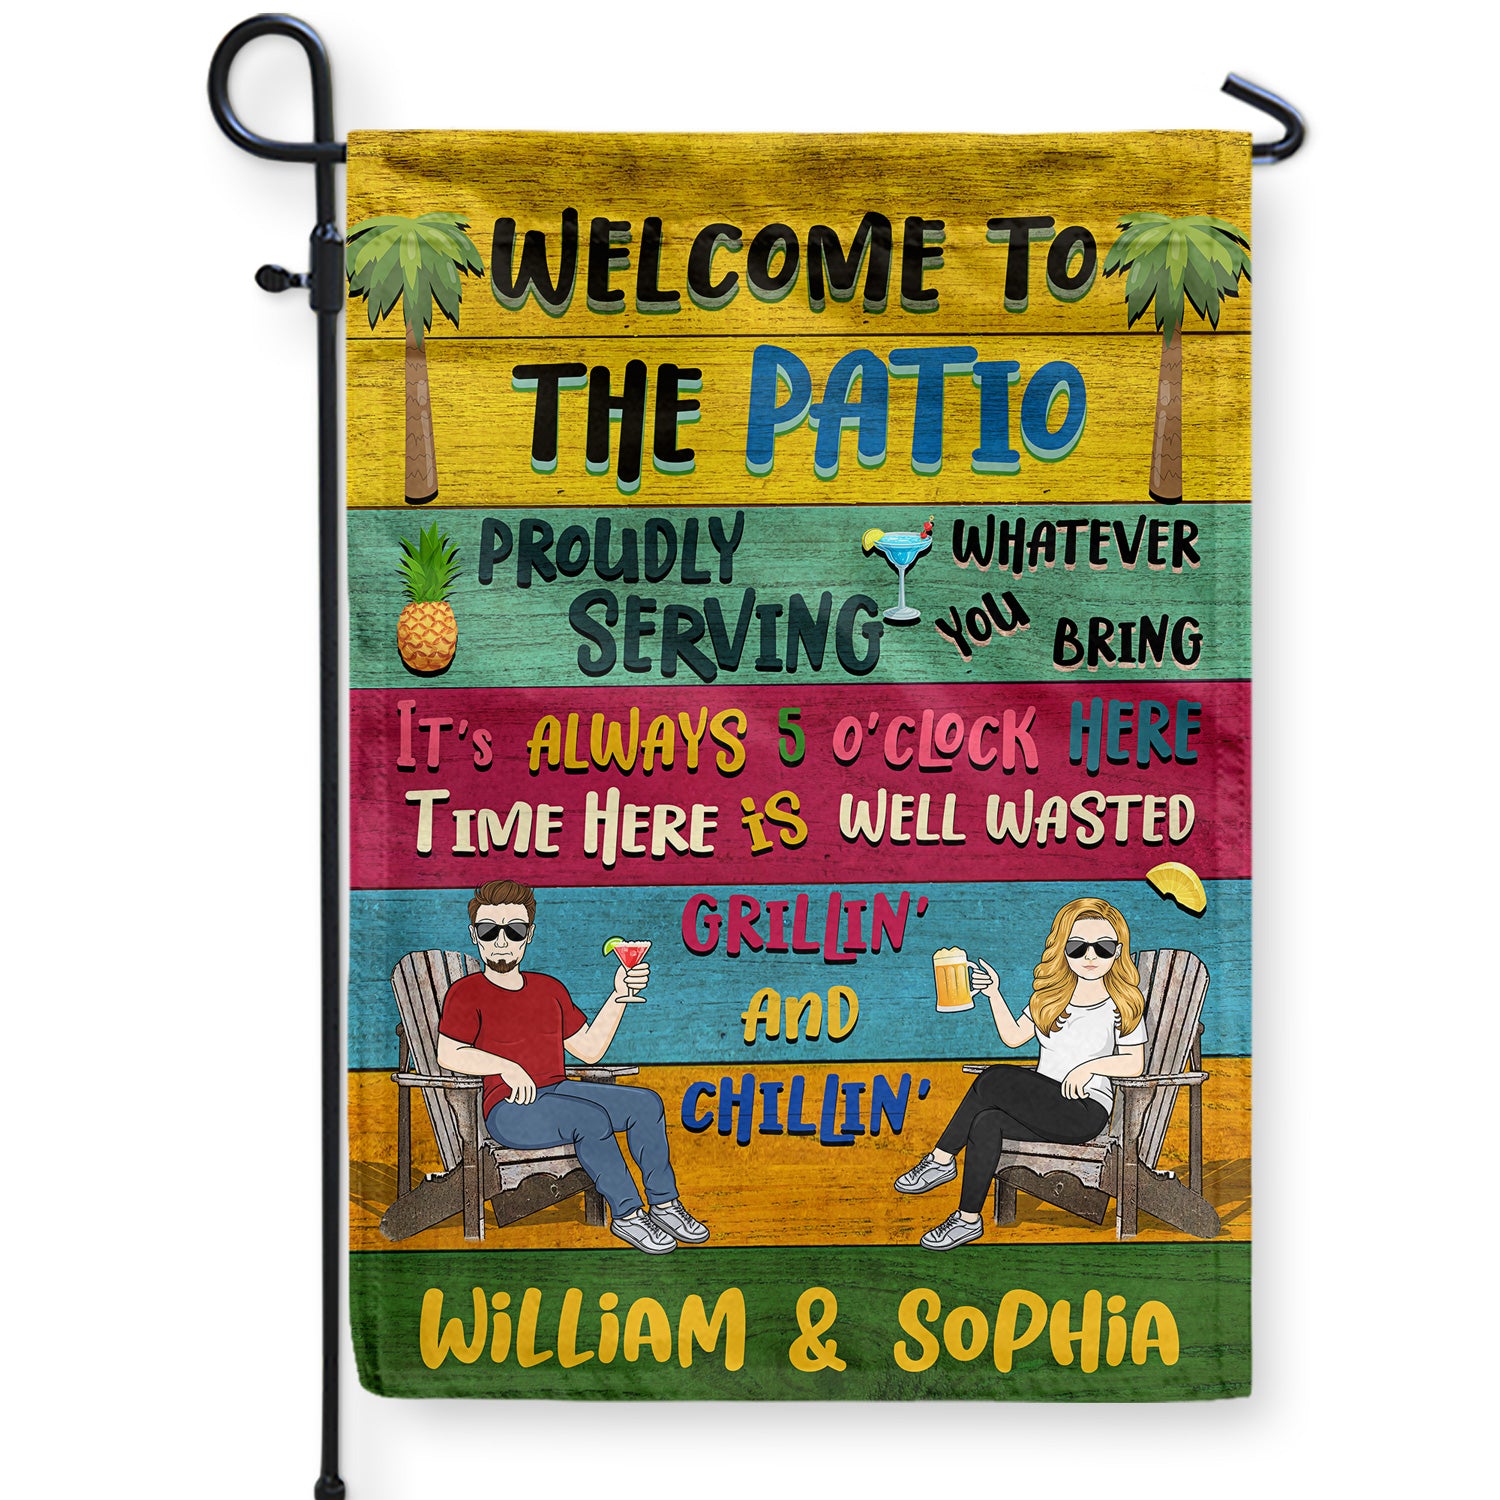 Patio Welcome Grilling Proudly Serving Whatever You Bring Cartoon Couple Single - Home Decor, Backyard Decor, Gift For Her, Him, Family, Couples, Husband, Wife - Personalized Custom Flag